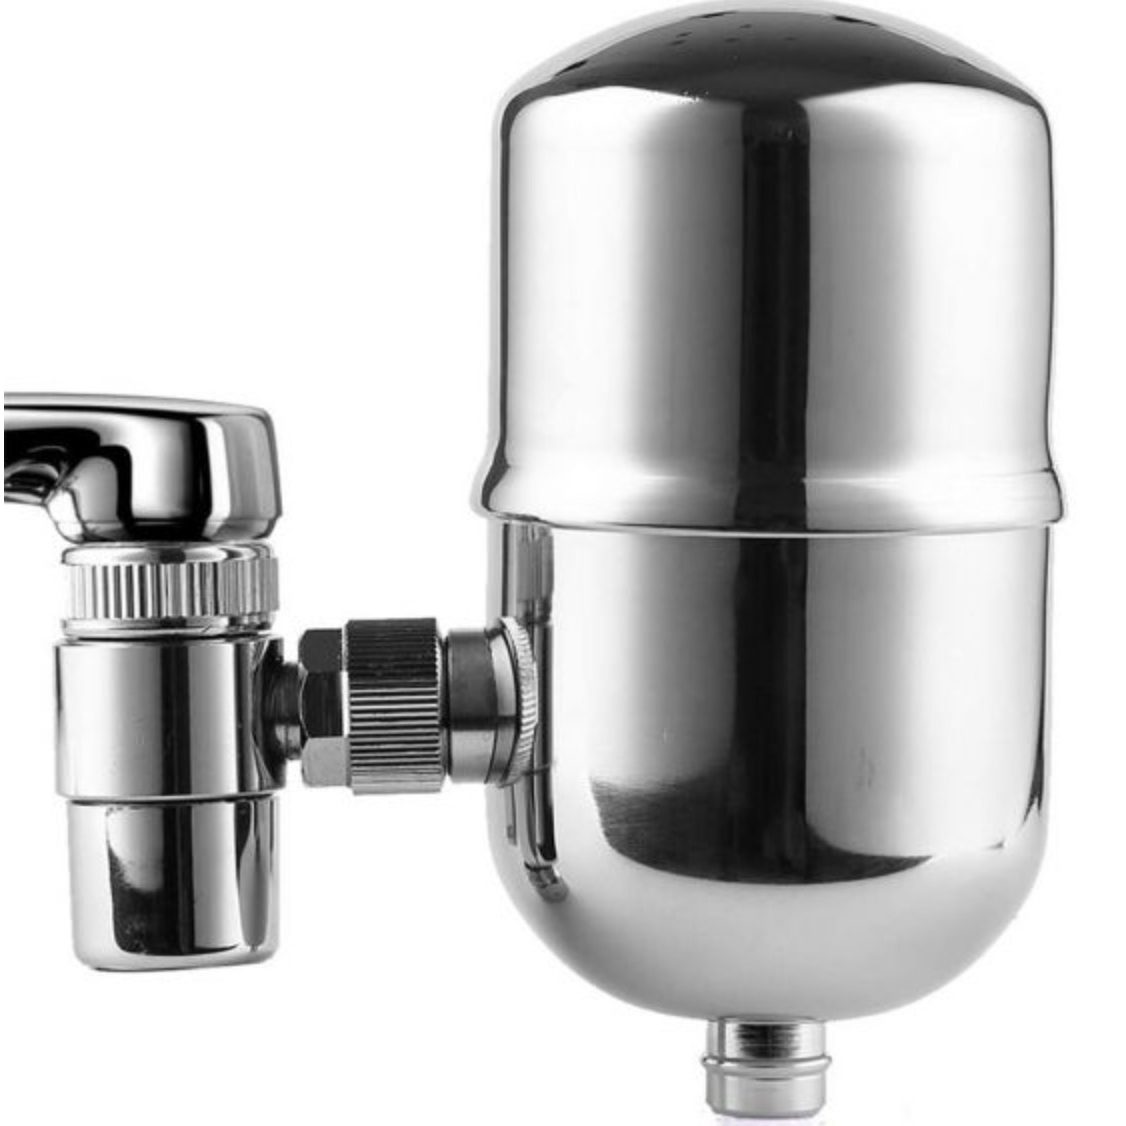 Stainless Steel Tap Water Filtration System